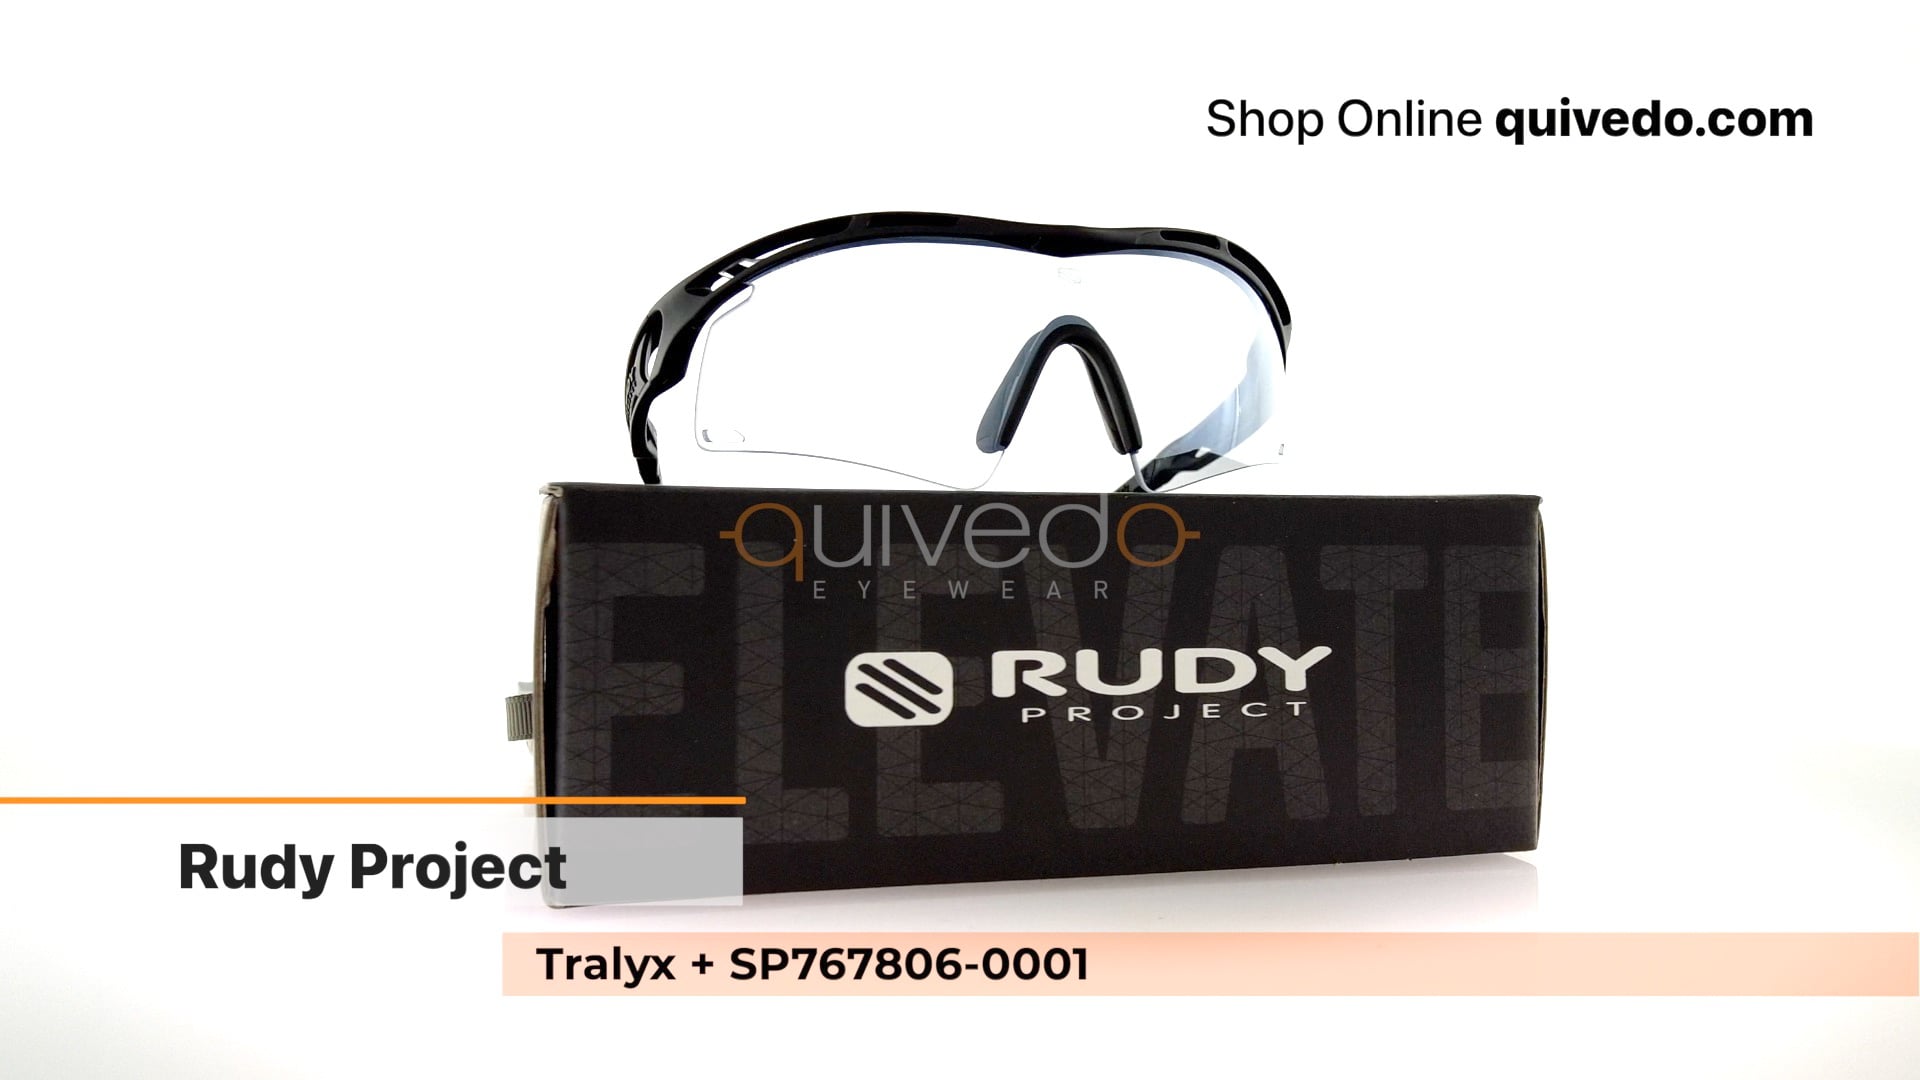 Rudy Project Tralyx + SP767806-0001